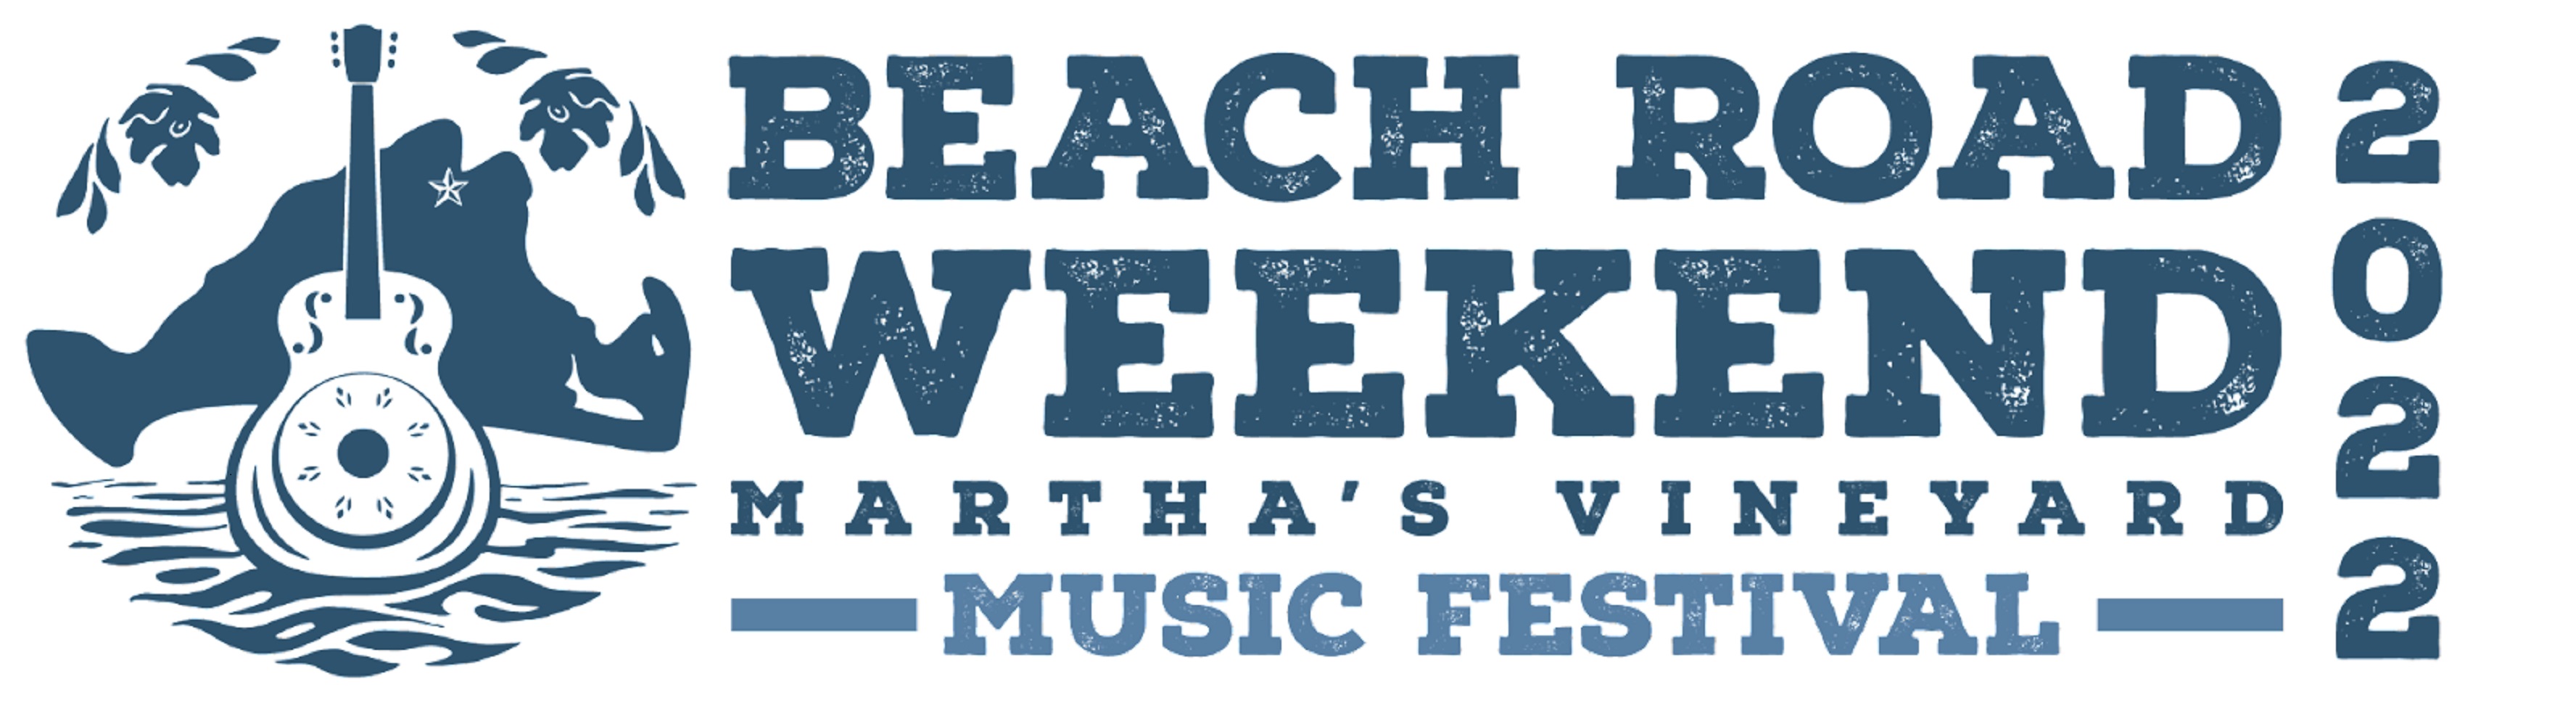 Beach Road Weekend Music Festival Inks Contract Extension Through 2024